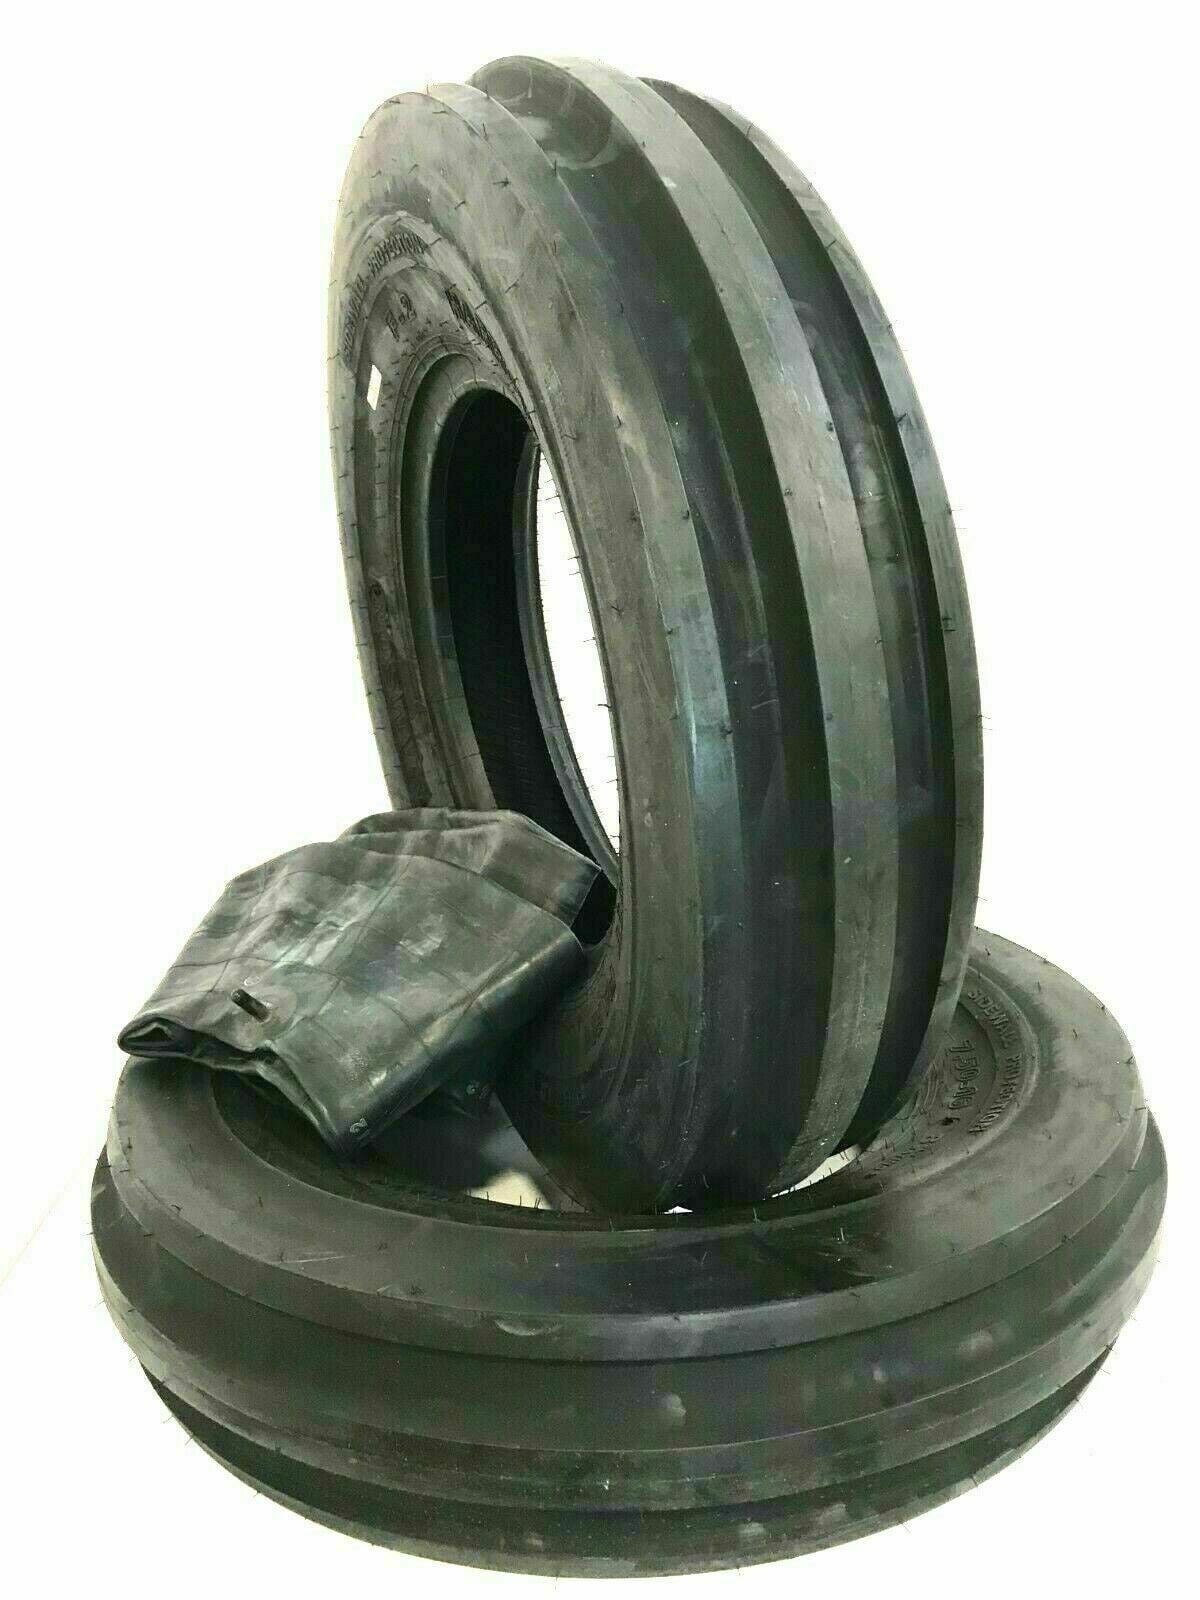 4.00-19 4.00-18 8N 9N Ford Front Farm Tractor Tire Inner Tube 400-18/19 400-19 